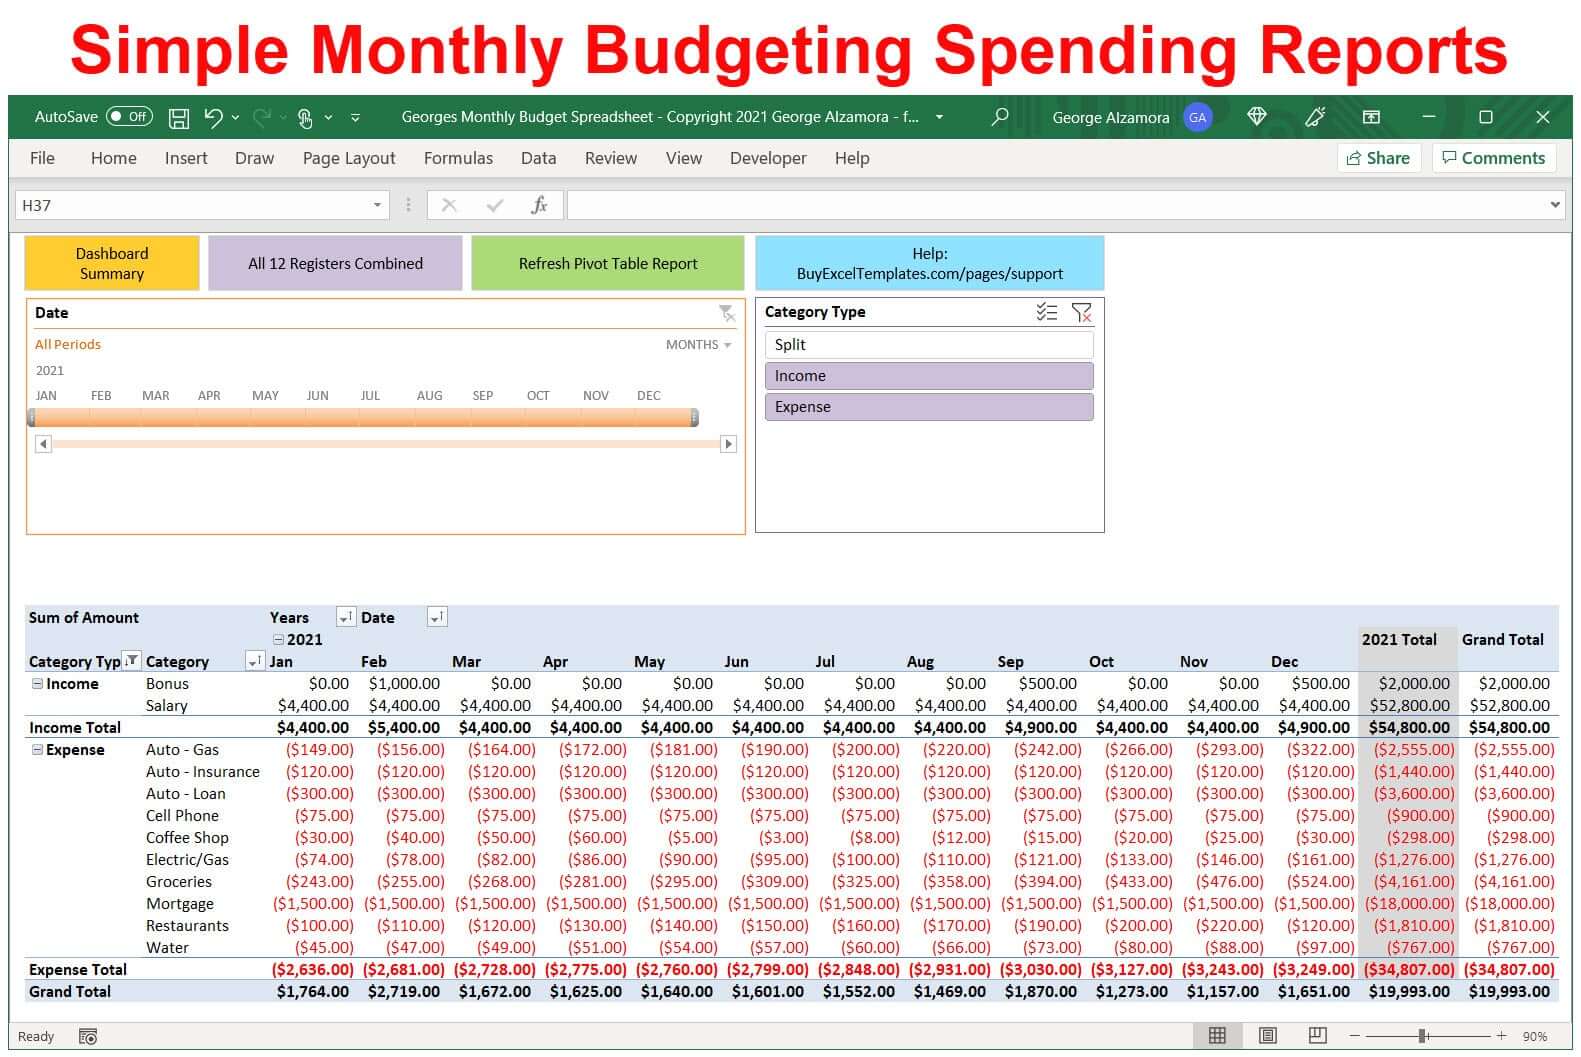 Simple monthly budgeting spending reports